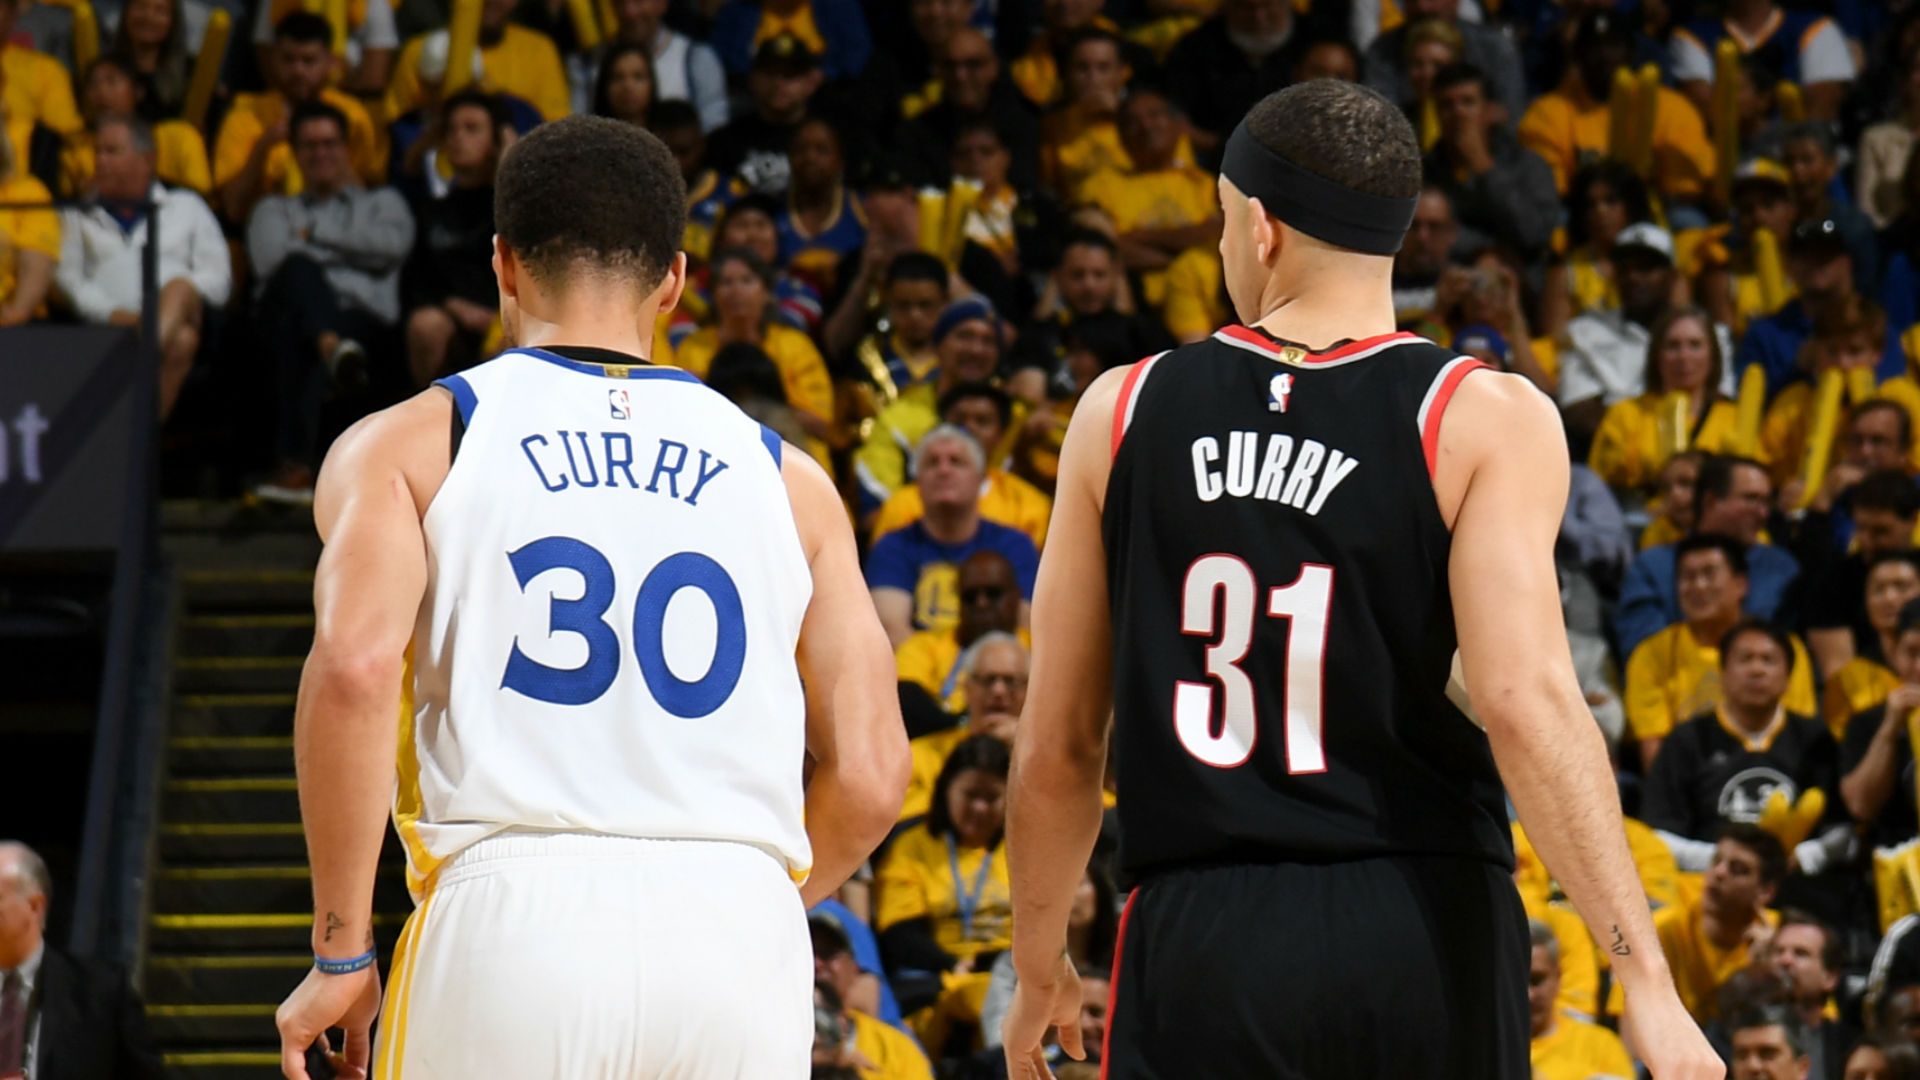 NBA Playoffs 2019: Steph Curry laughs off his parents' 'coin flip' support after taking on his brother Seth in Game 1. NBA.com India. The official site of